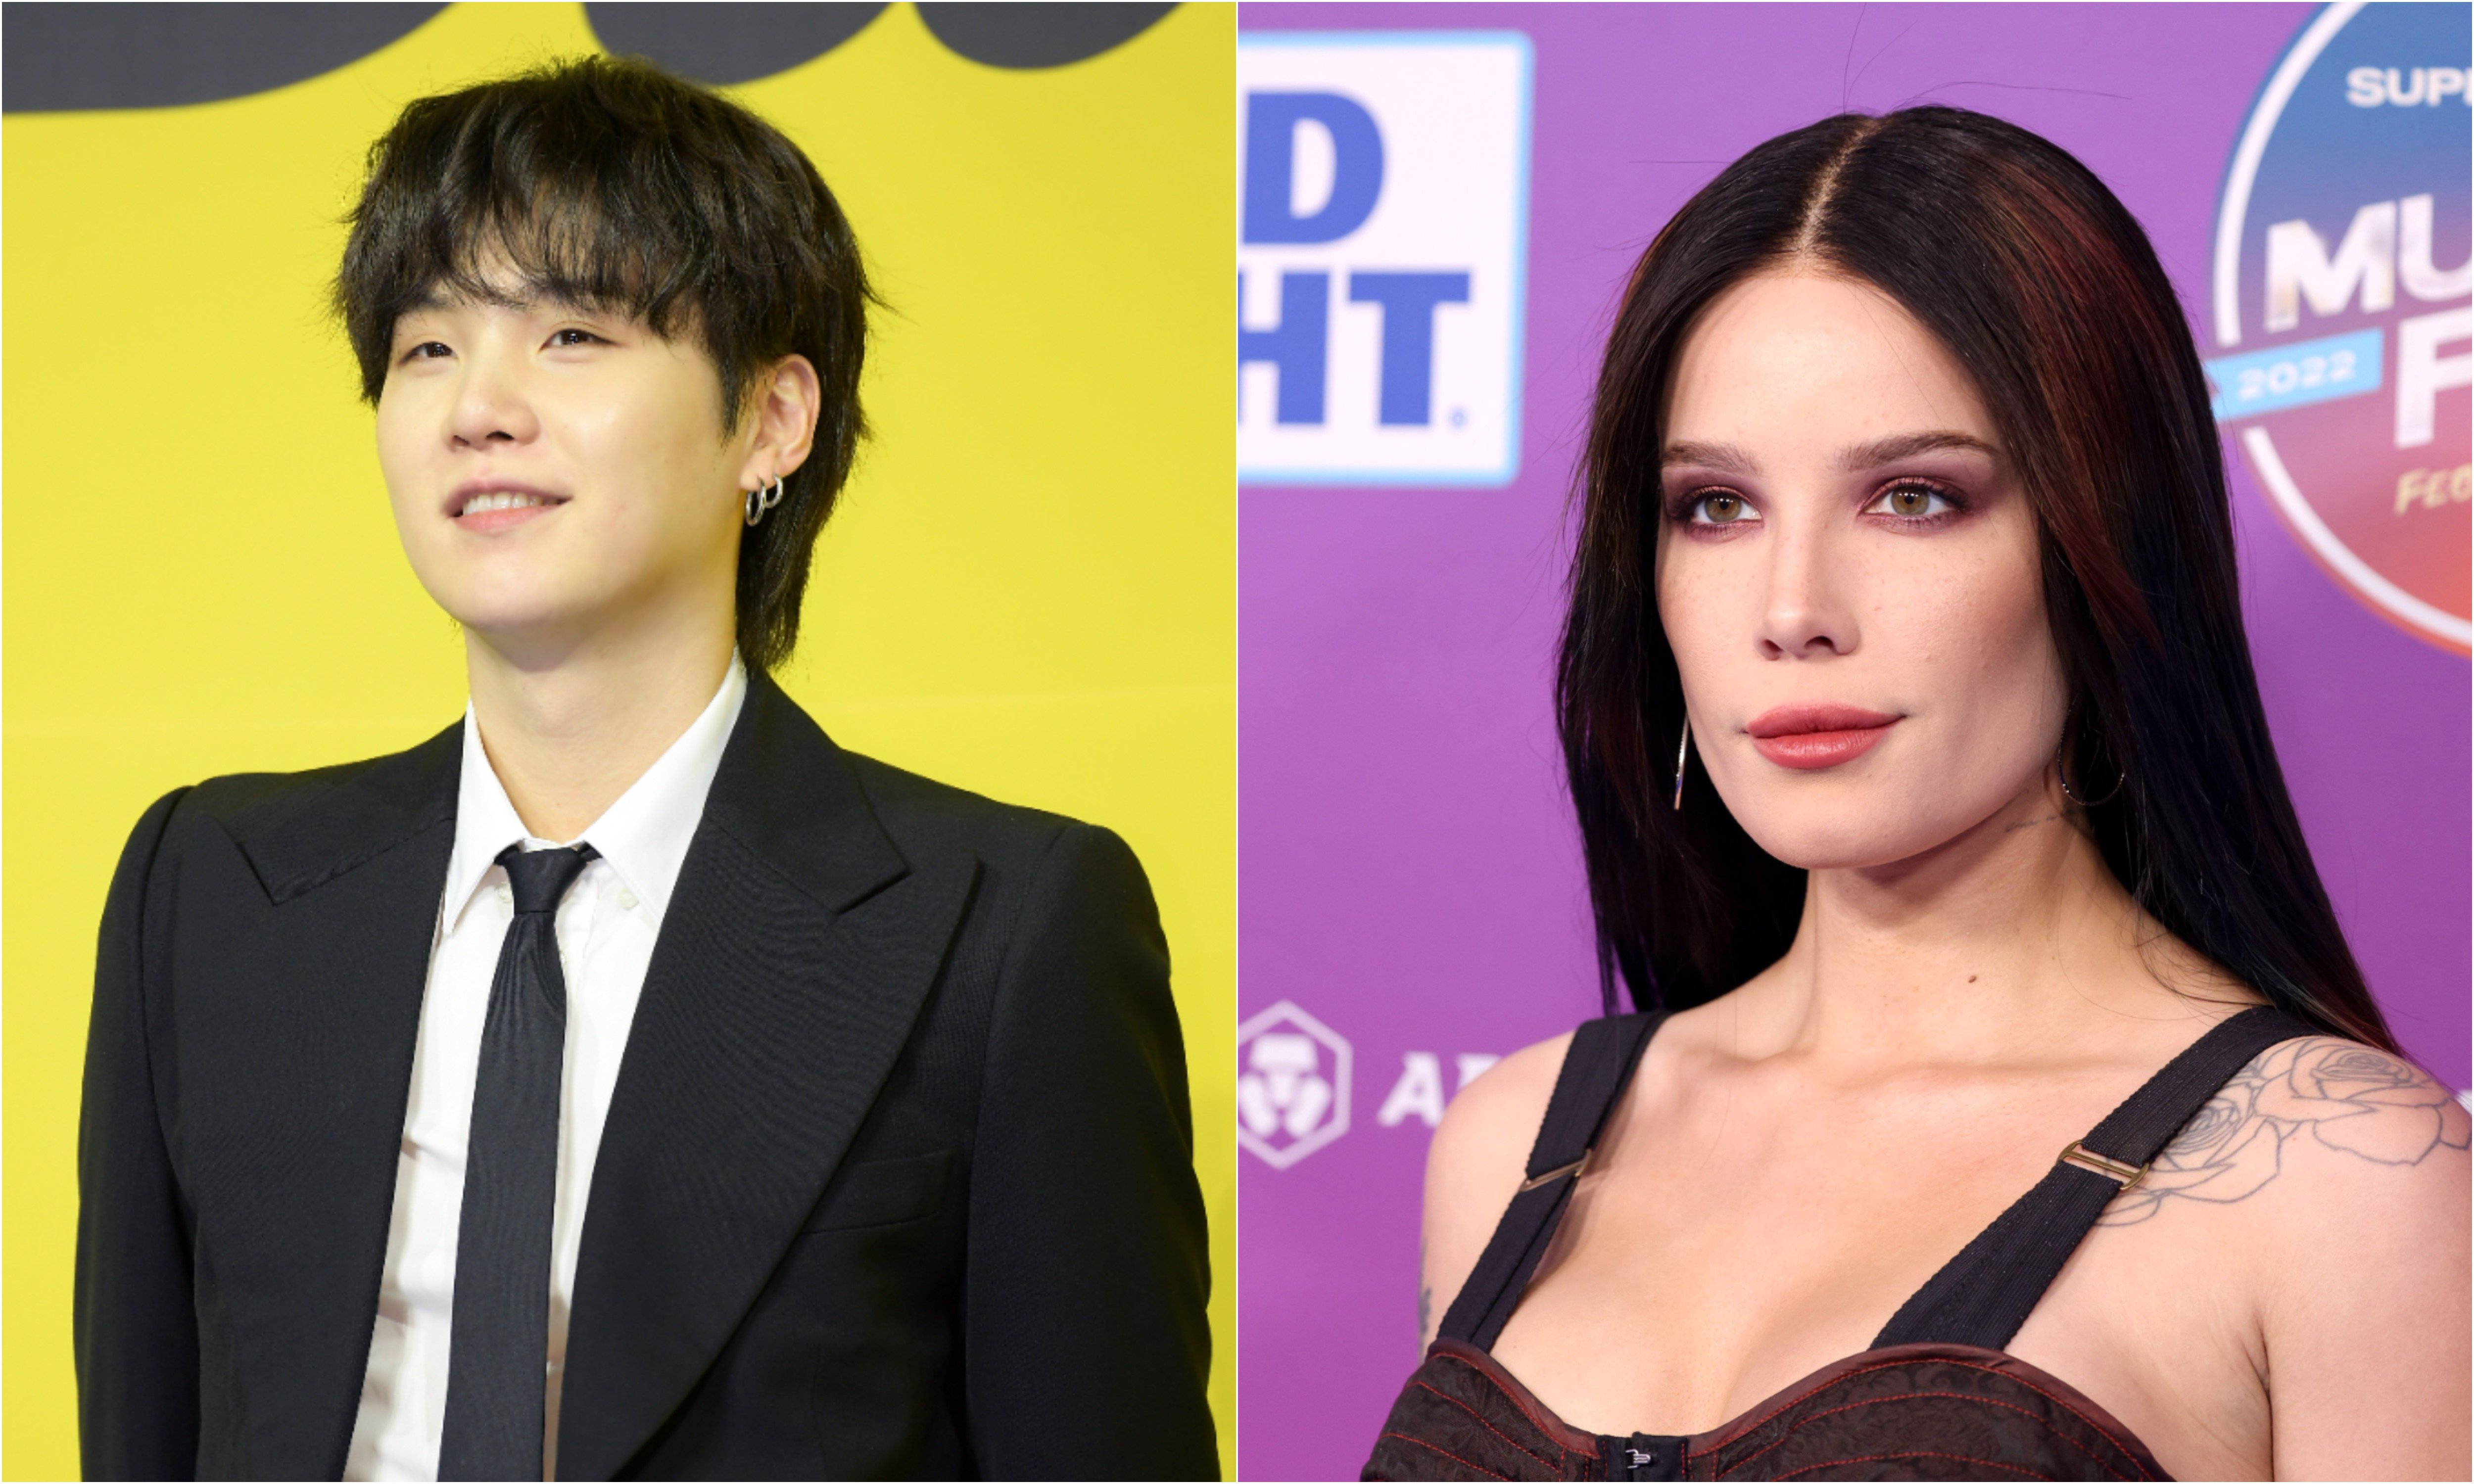 A joined photo of Suga of BTS and Halsey